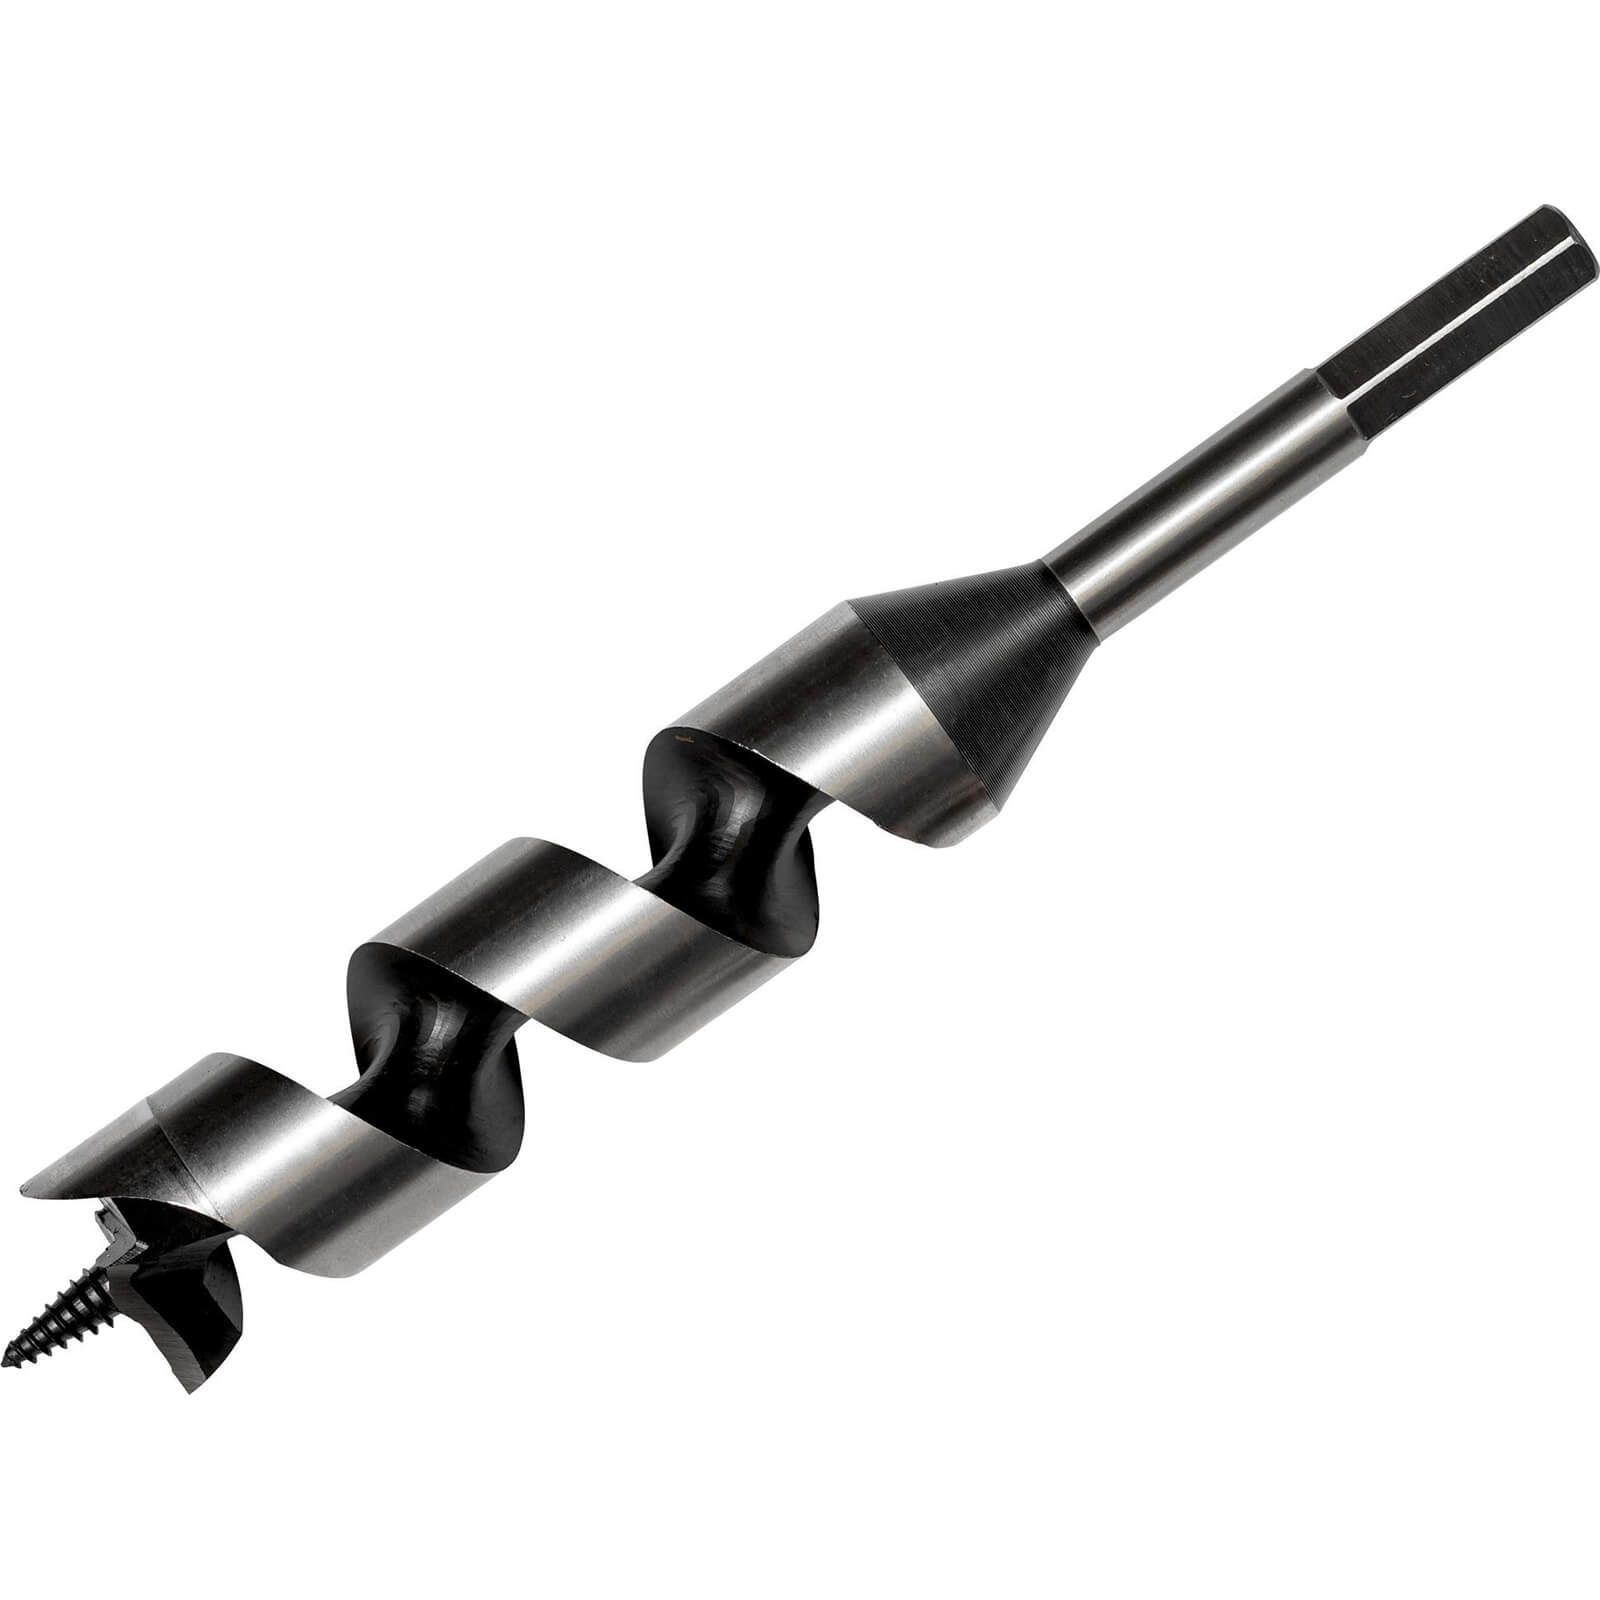 Photo of Bahco 9626 Series Combination Auger Drill Bit 28mm 230mm